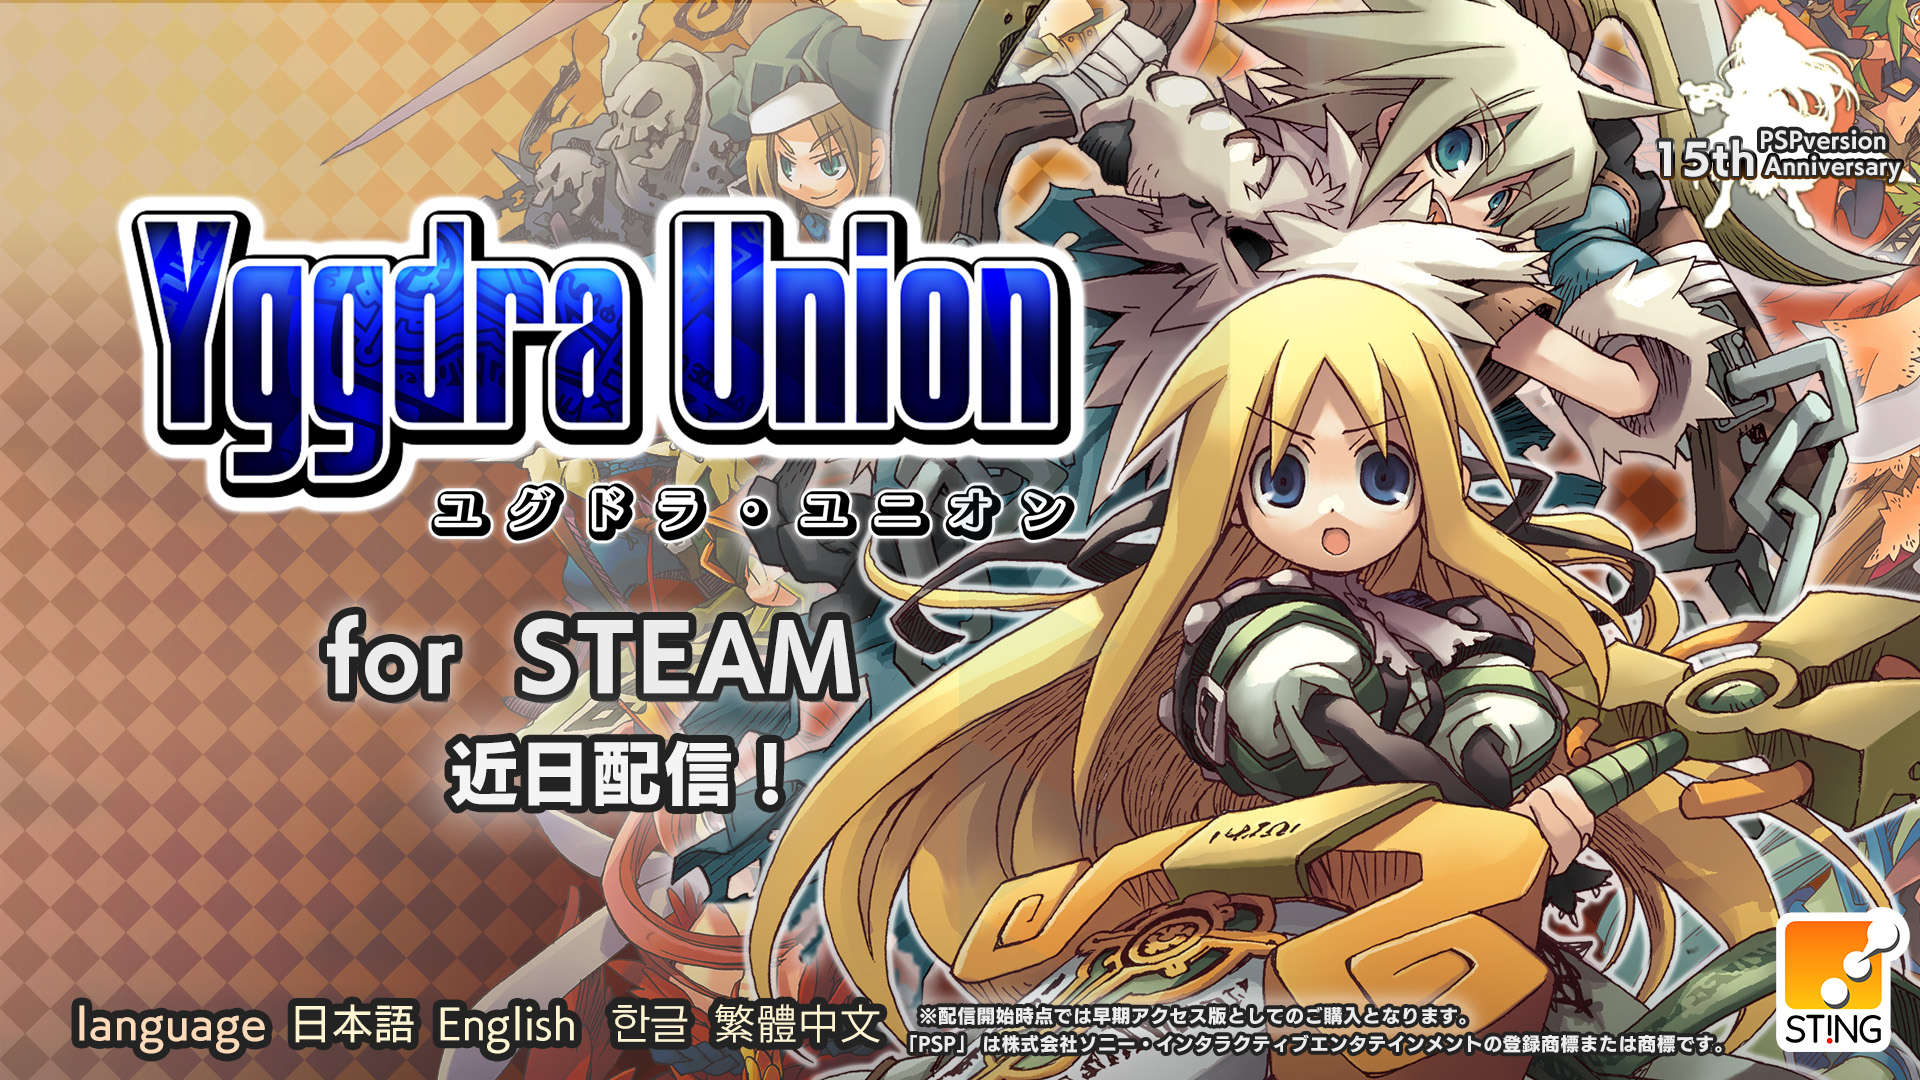 Yggdra Union is getting a PC port